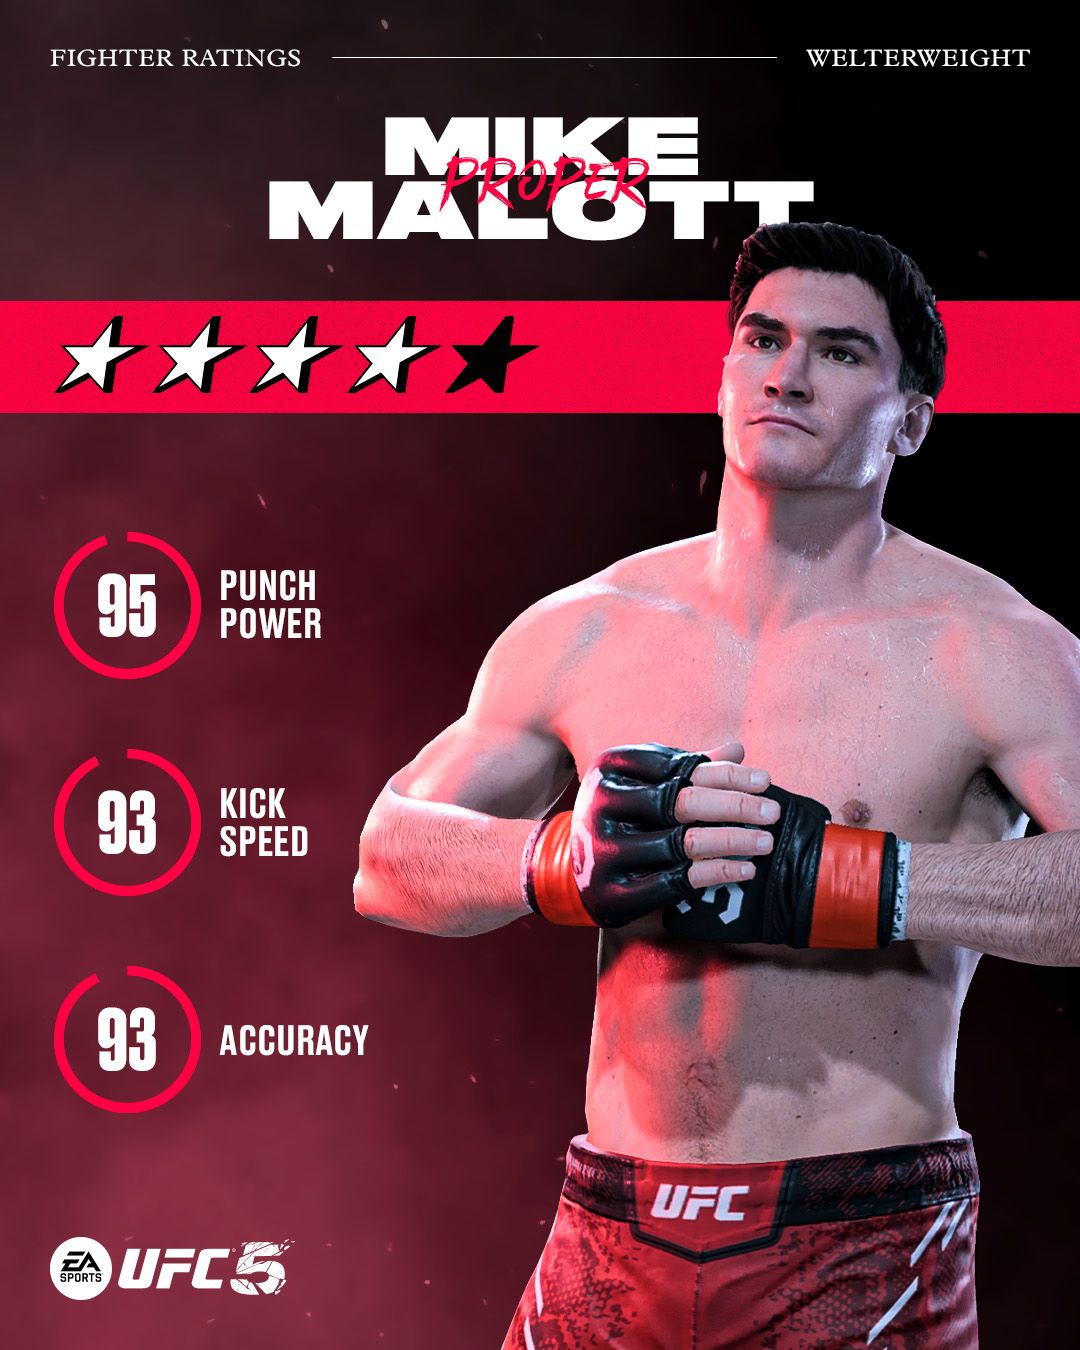 EA Sports UFC 5 Roster, EA Sports UFC 5 Gameplay, Overview, and More - News